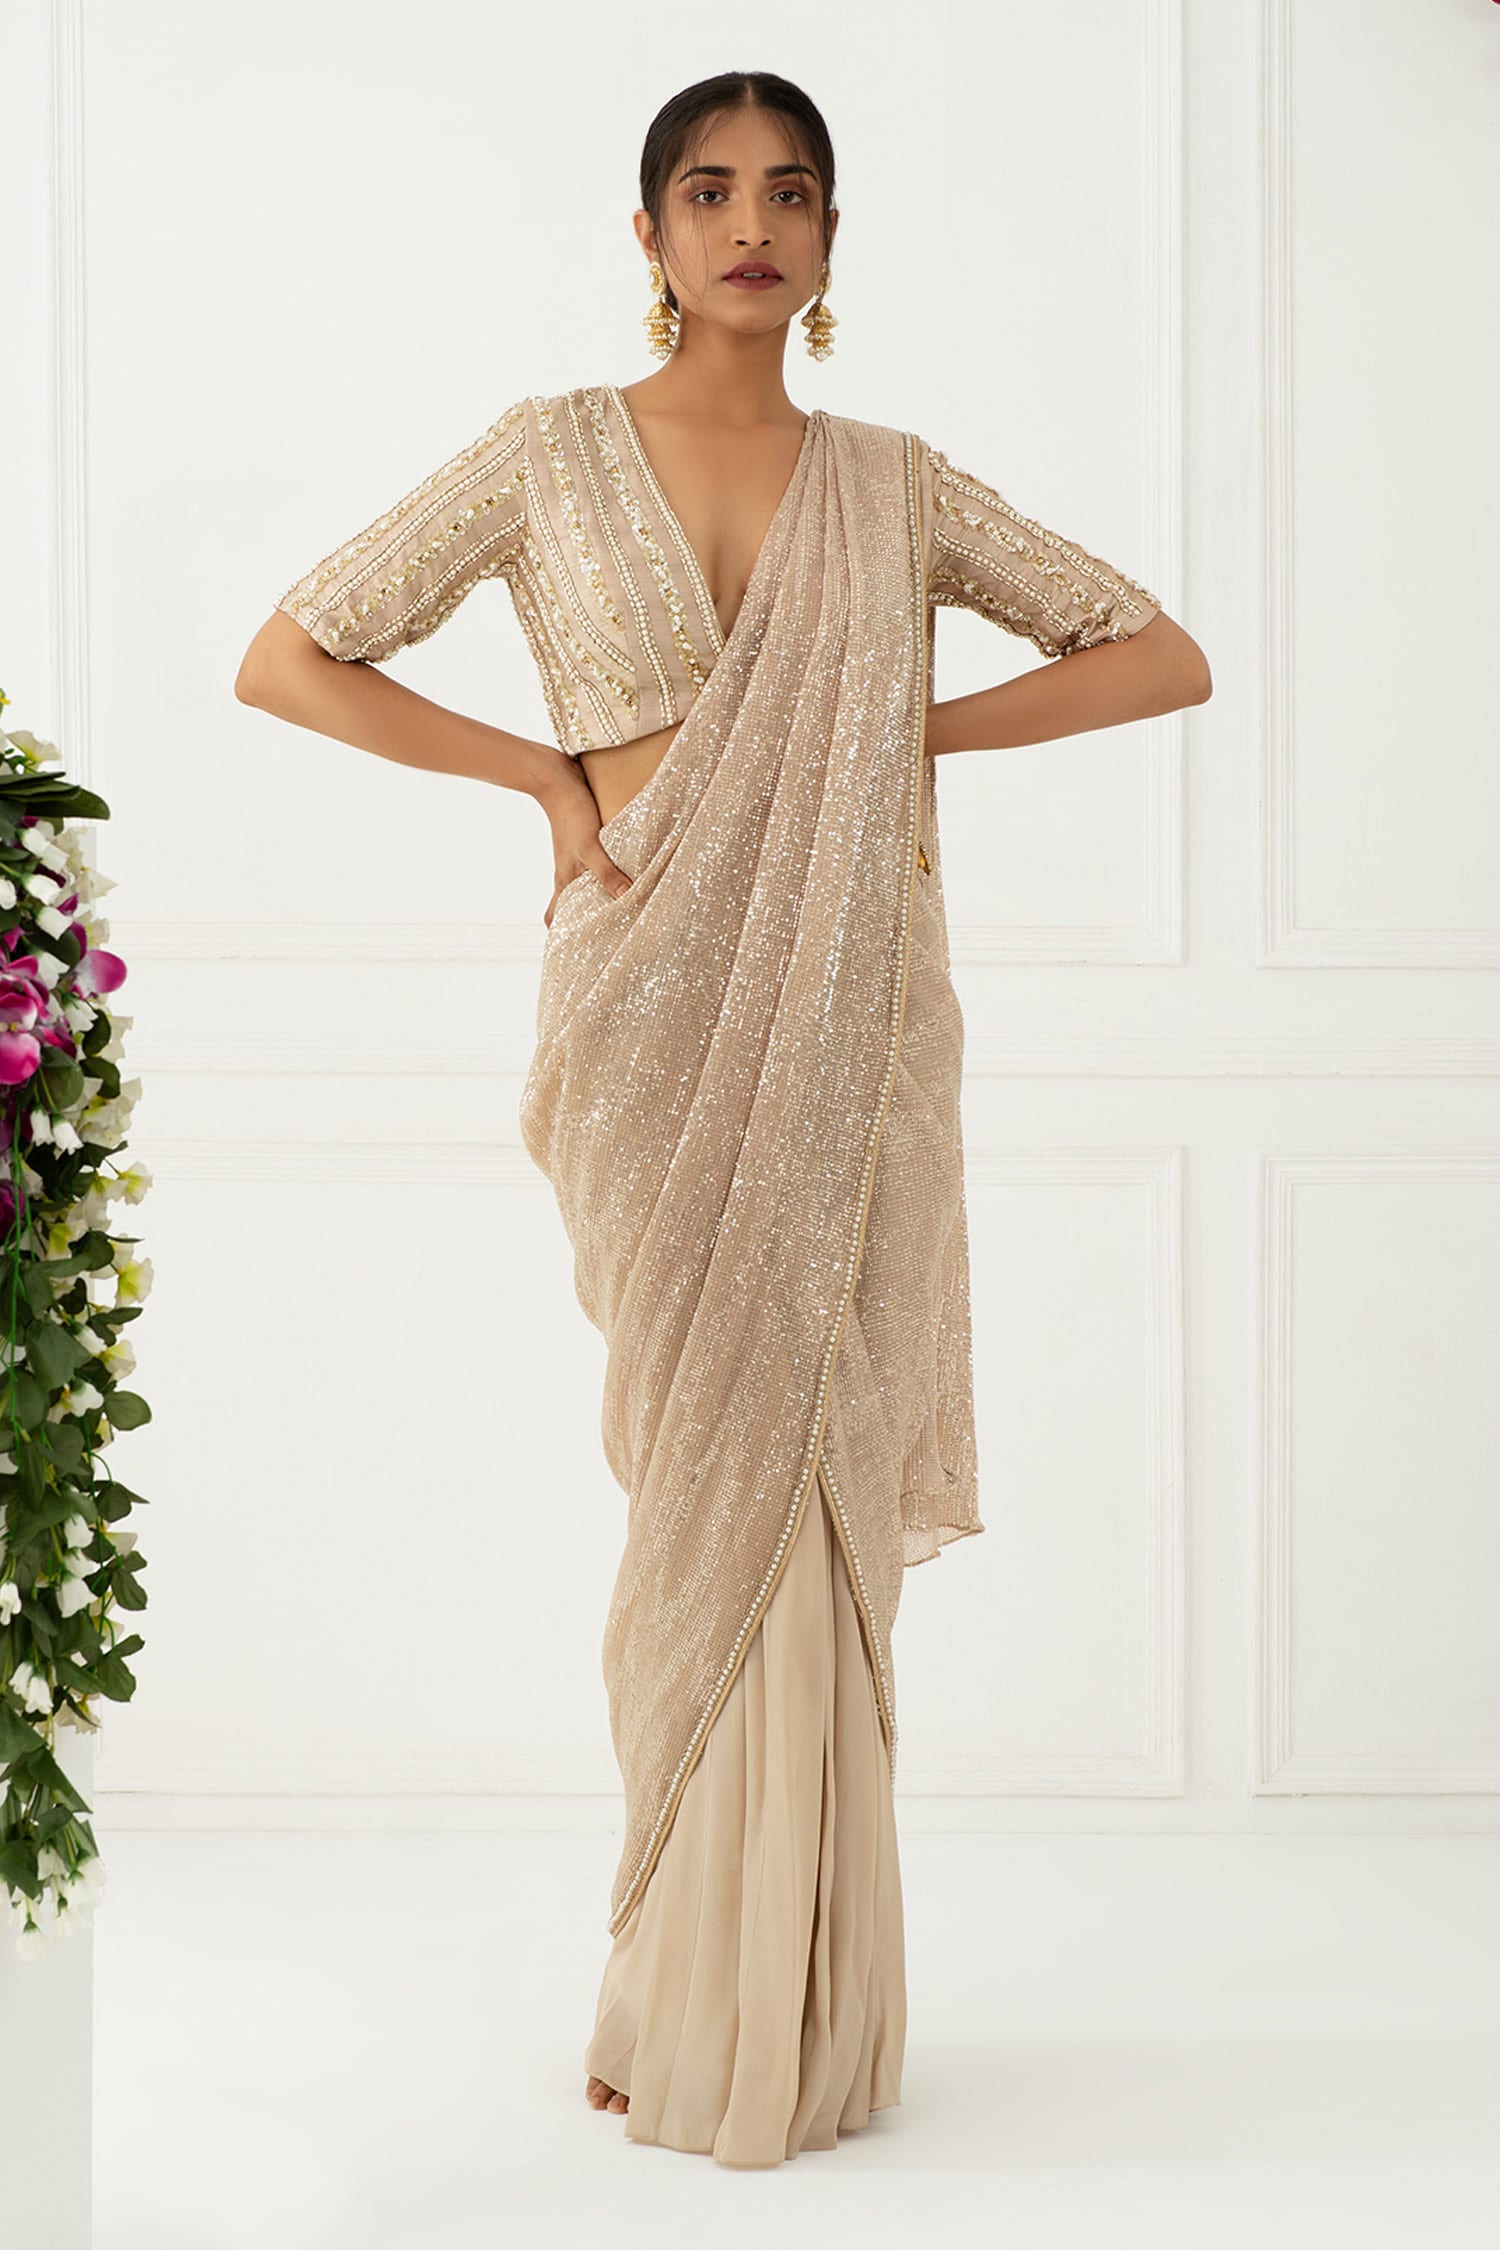 Nidhika Shekhar Beige Crepe Embroidery V Neck Sequin Pre-draped Saree With Blouse For Women